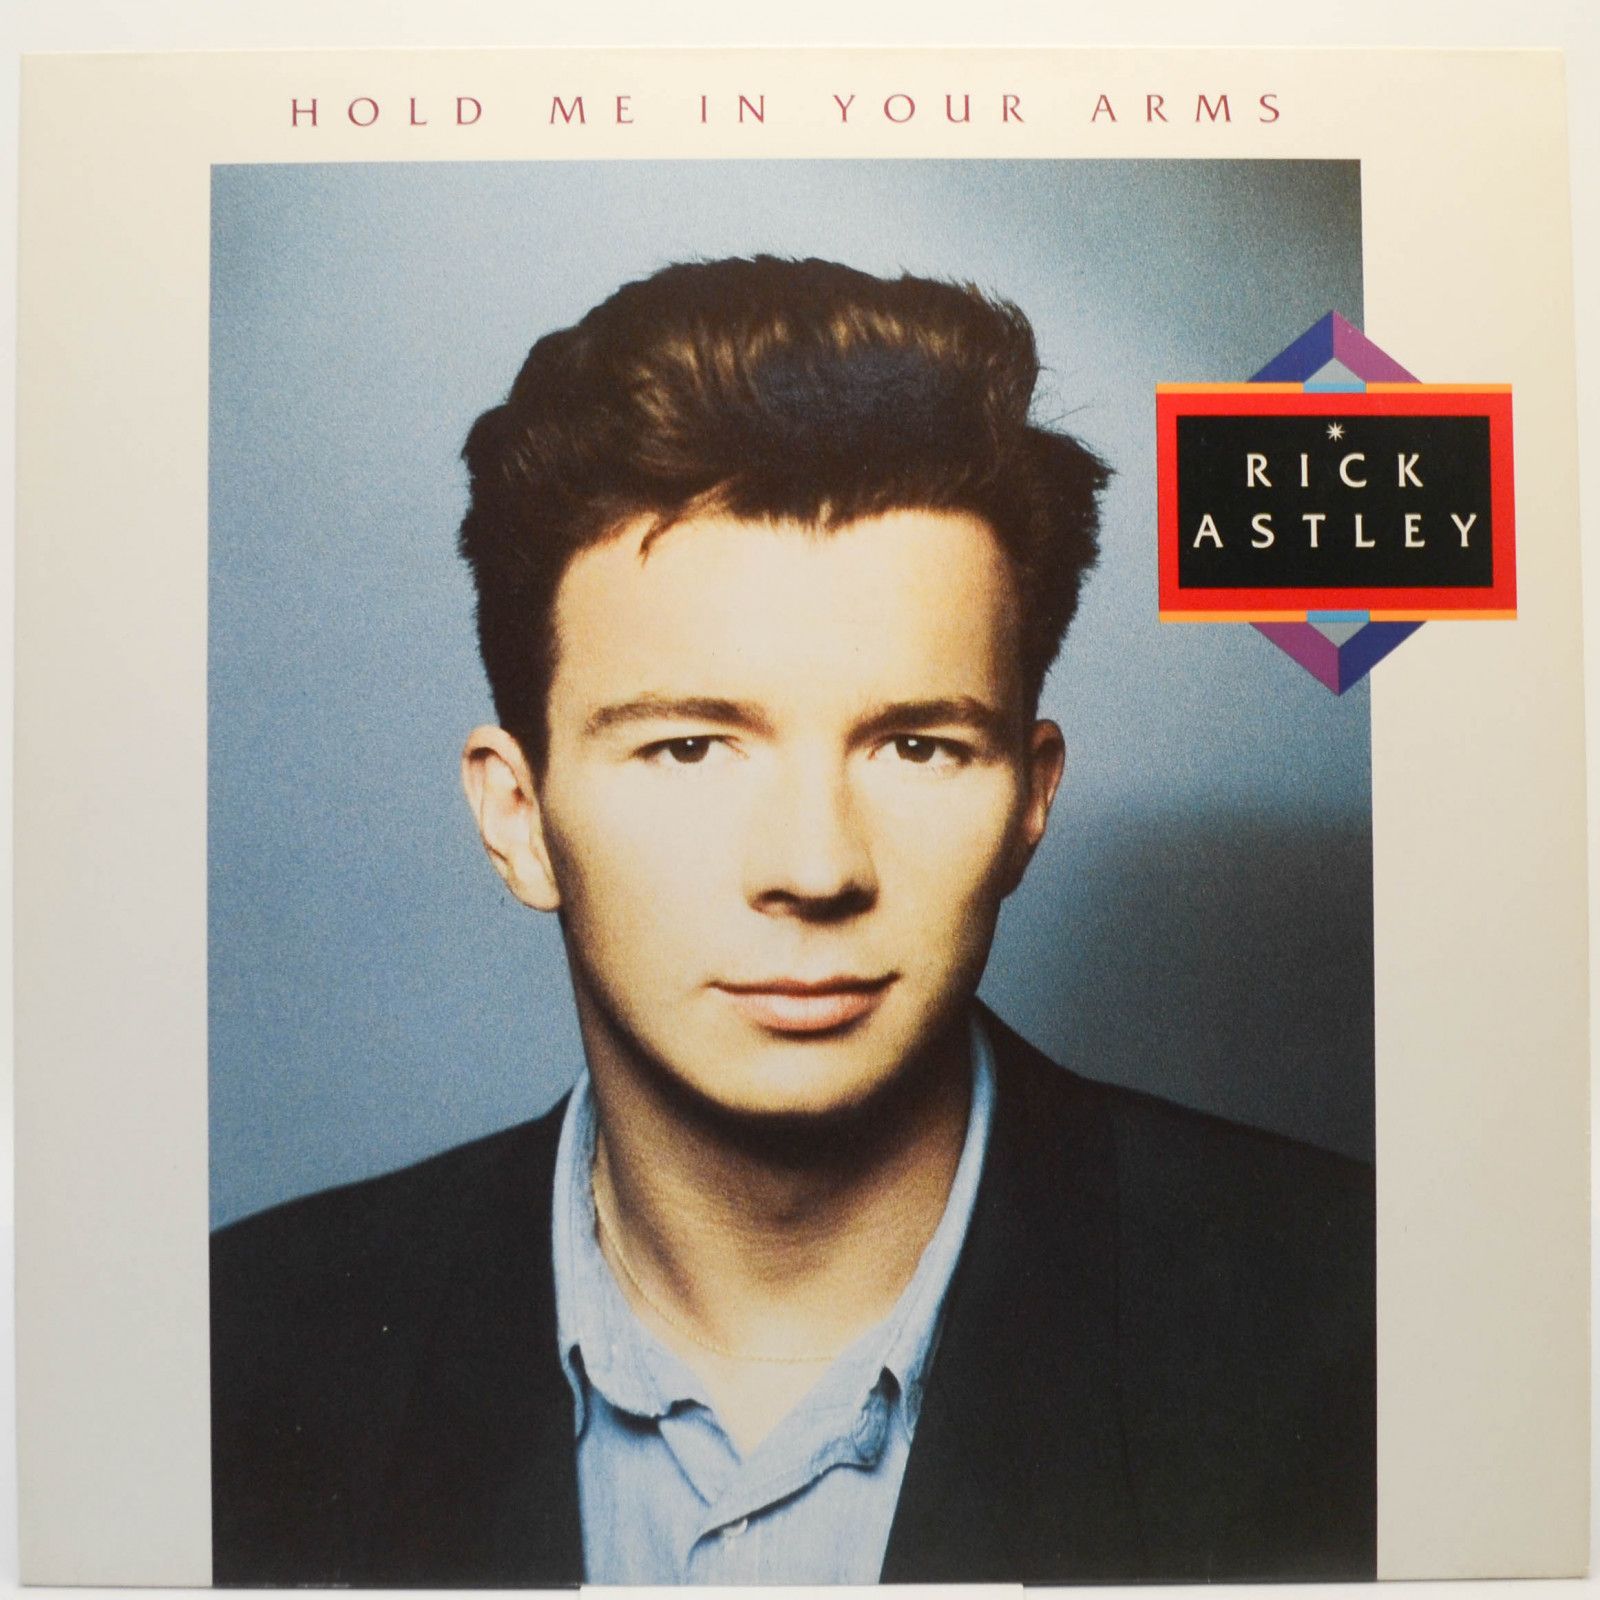 Rick Astley — Hold Me In Your Arms, 1988